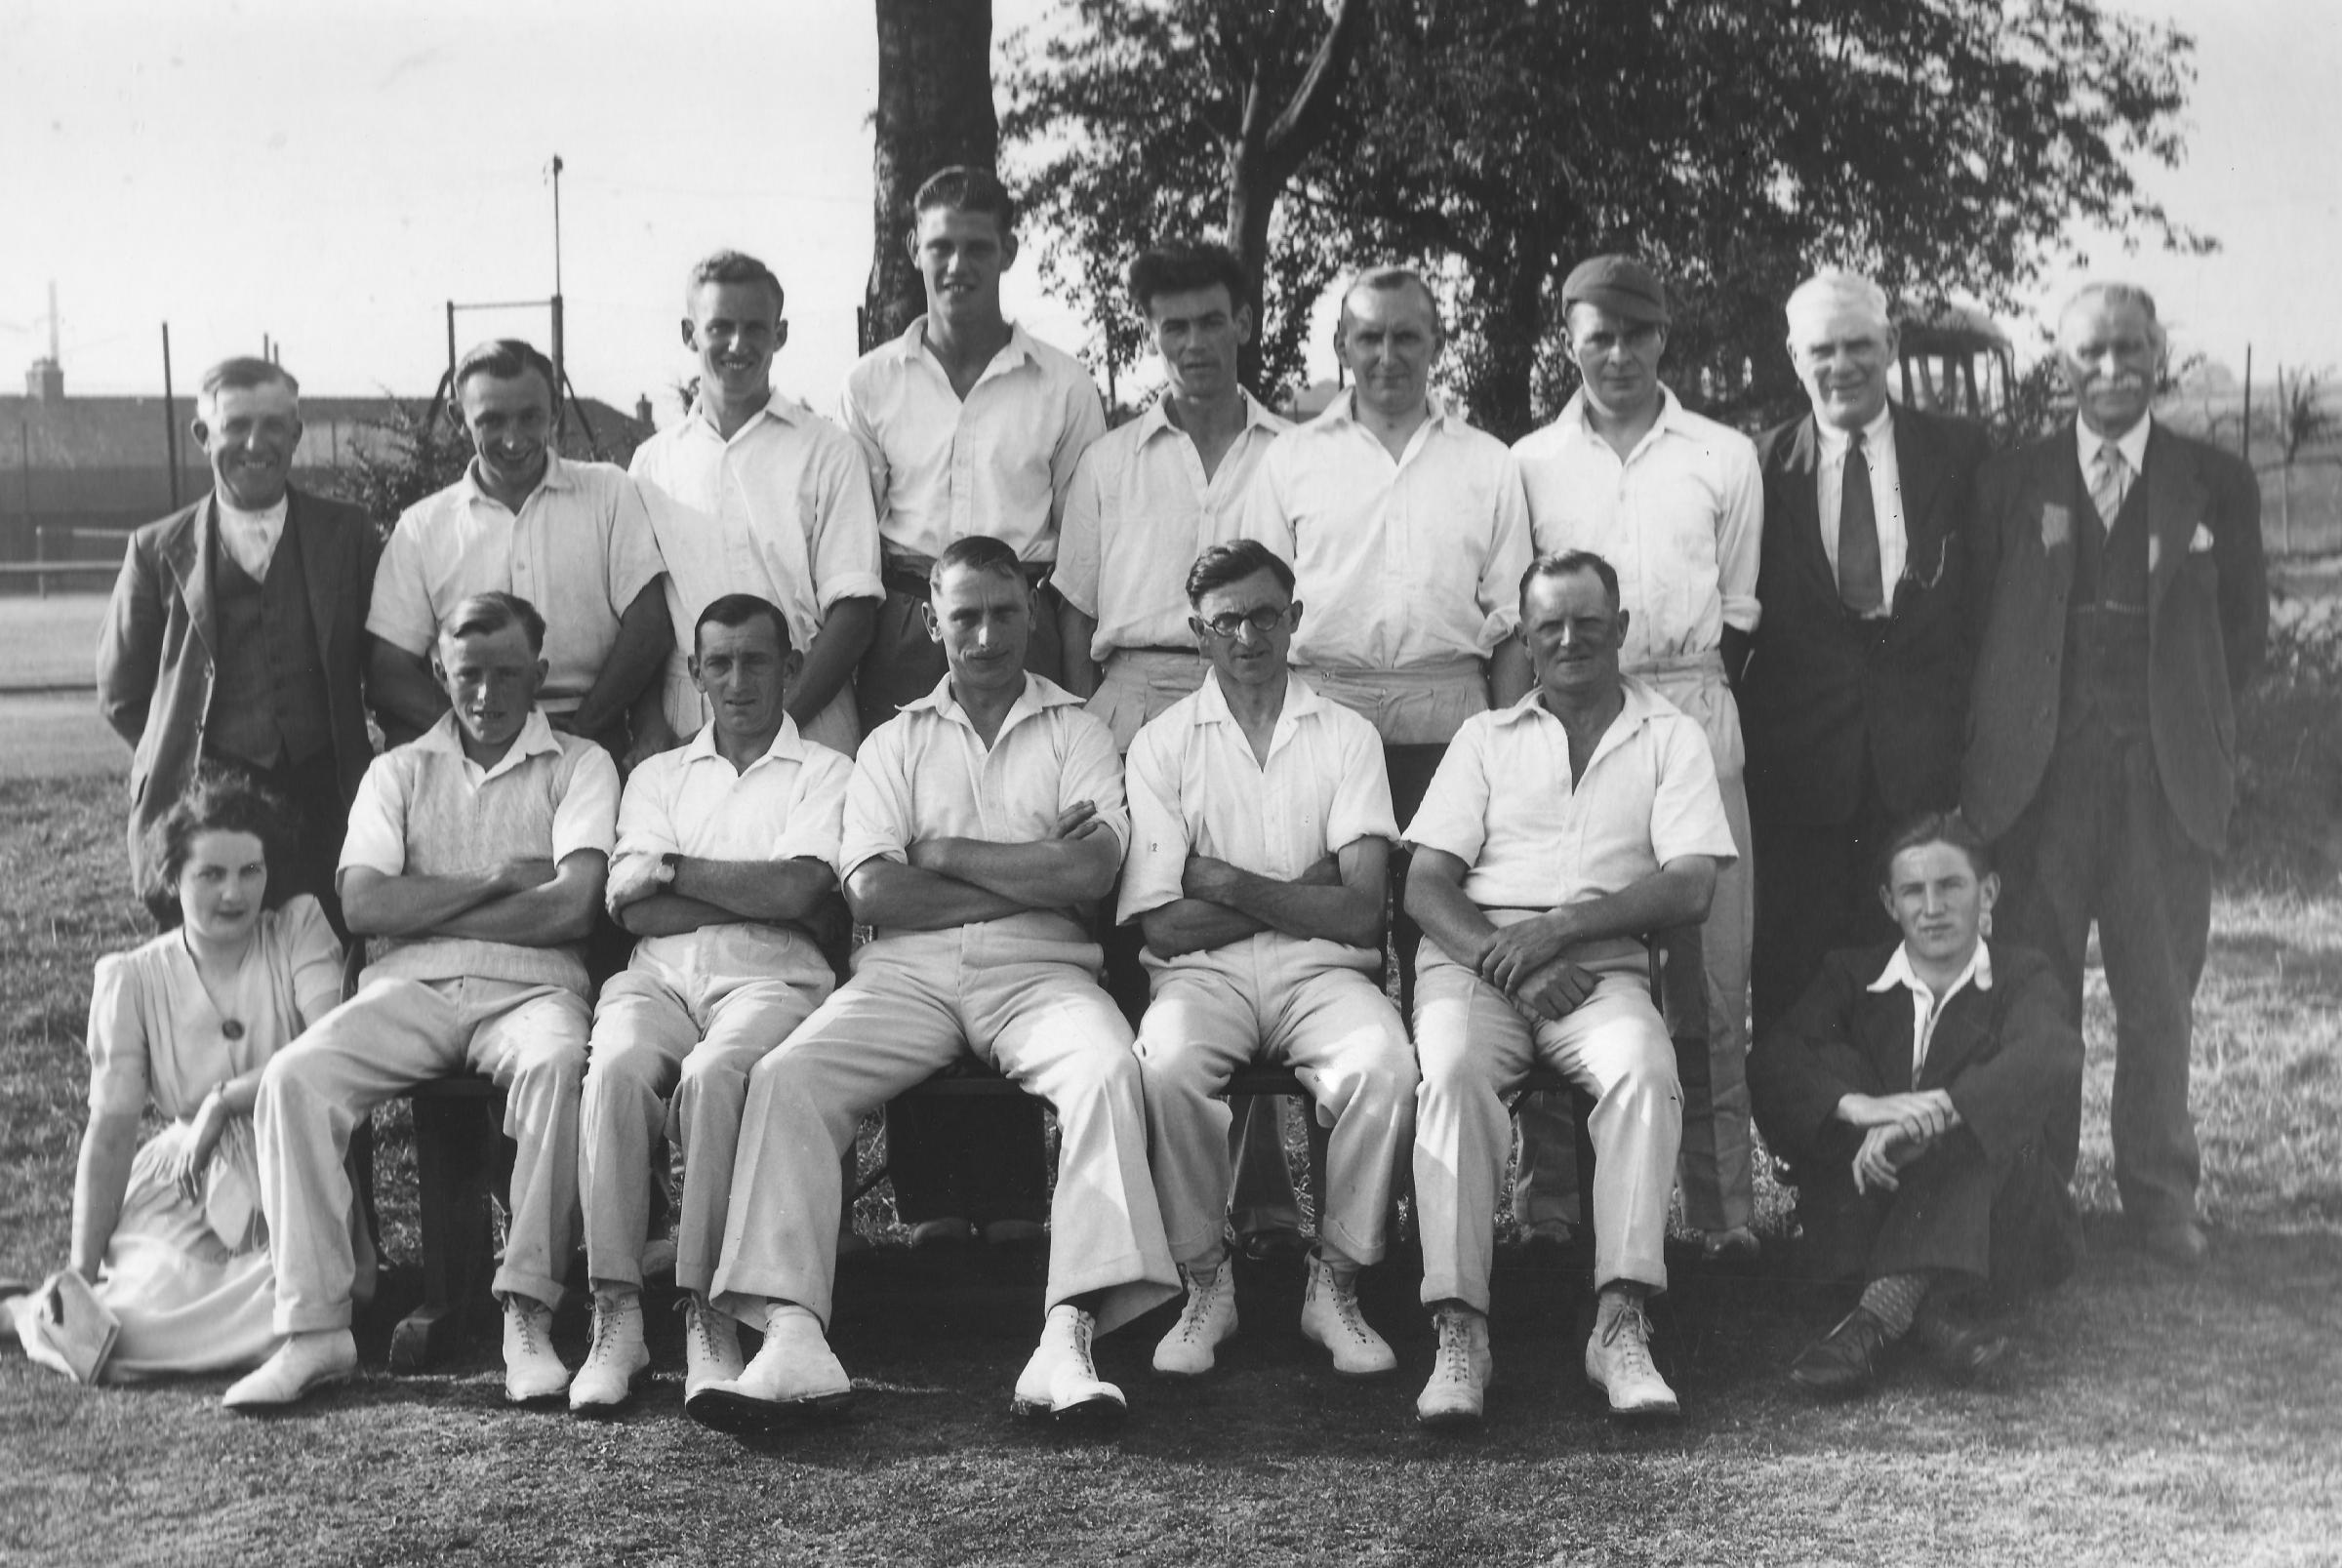 A 1950s picture of East Cowton Cricket Club which won the Wellshood Cup with so many players from Great Smeaton that the picture was on display in the Smeaton pavilion. Back, from left: Pat Morrison, Artie Kay, Mark Marley, George Kirkbride, Harry